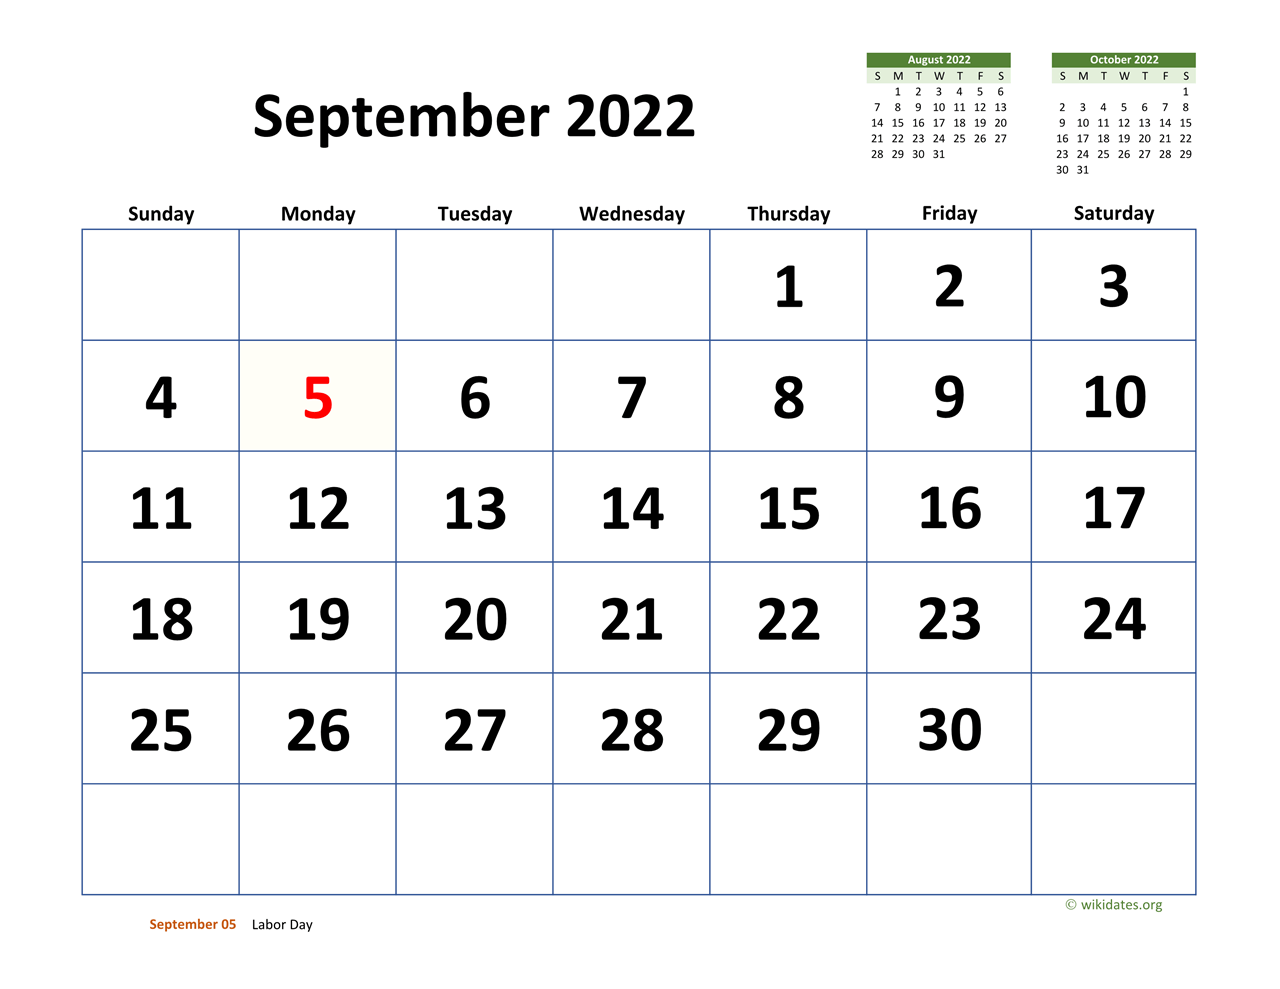 September 2022 Calendar with Extralarge Dates